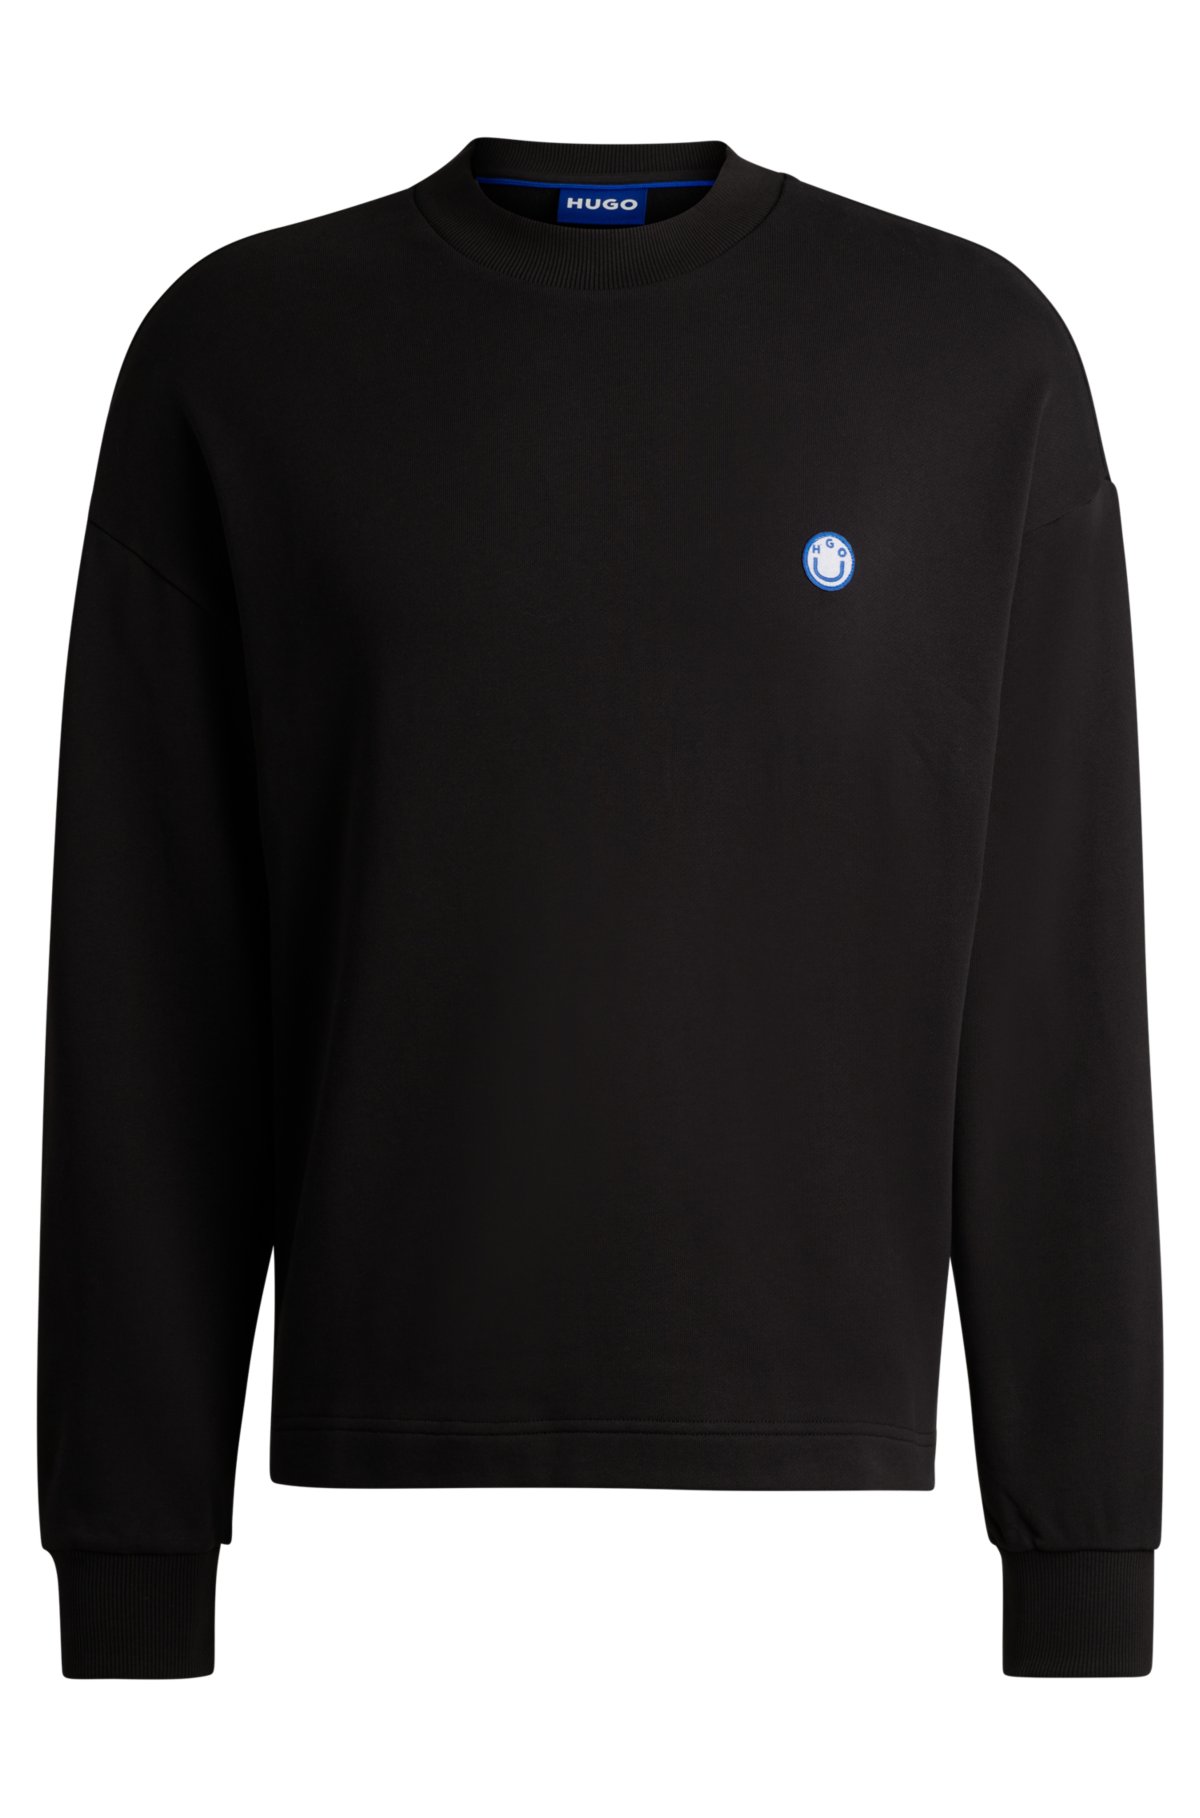 Cotton-terry sweatshirt with smiley-face logo patch, Black